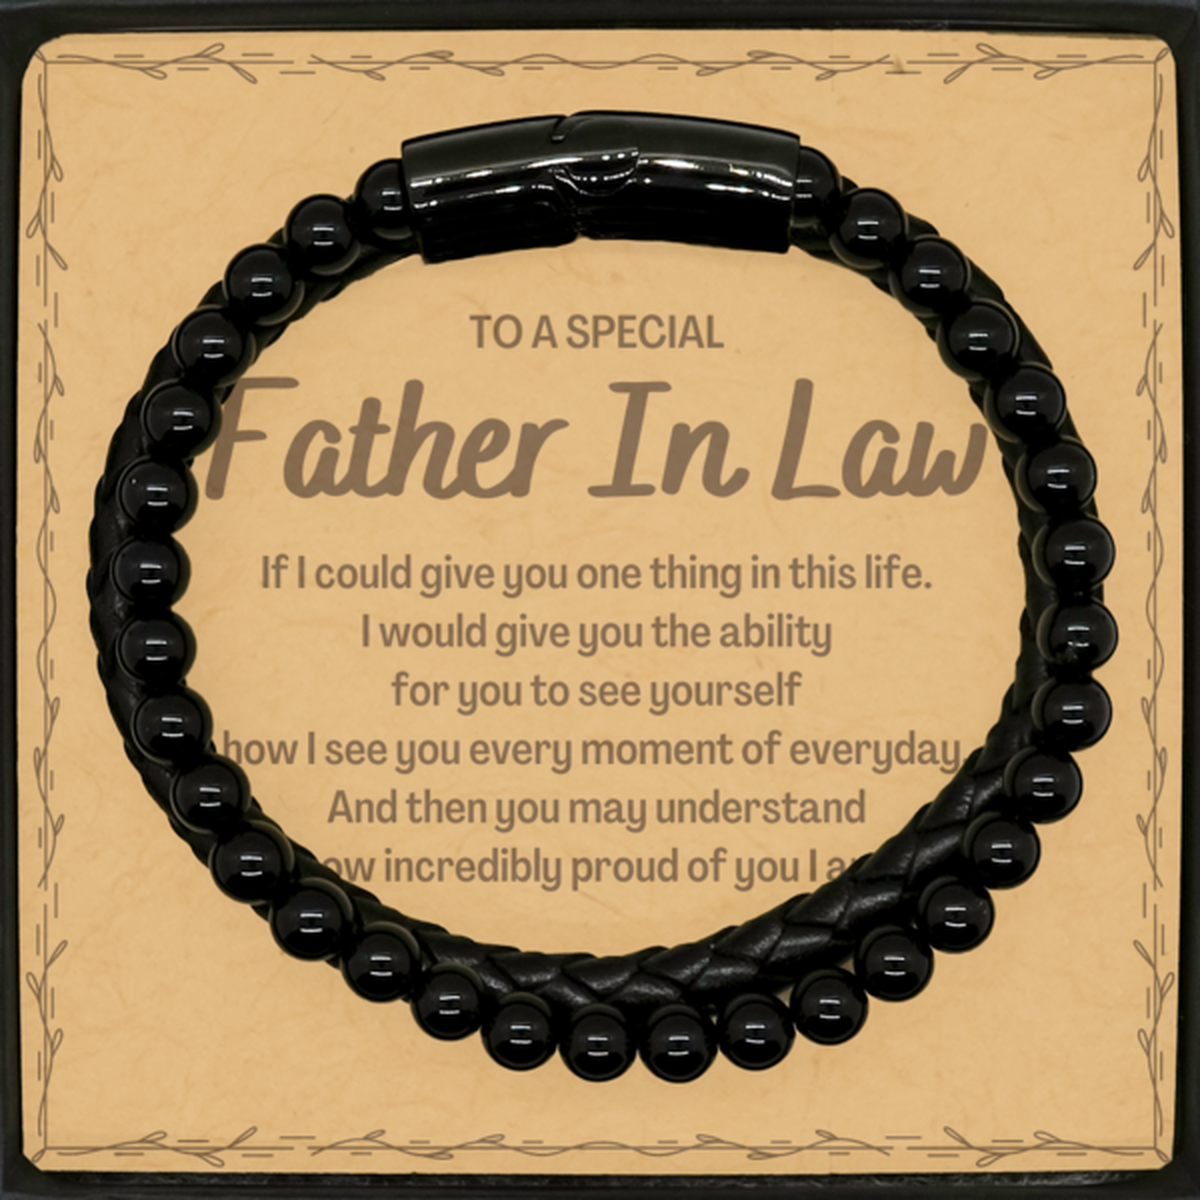 To My Father In Law Stone Leather Bracelets, Gifts For Father In Law Message Card, Inspirational Gifts for Christmas Birthday, Epic Gifts for Father In Law To A Special Father In Law how incredibly proud of you I am